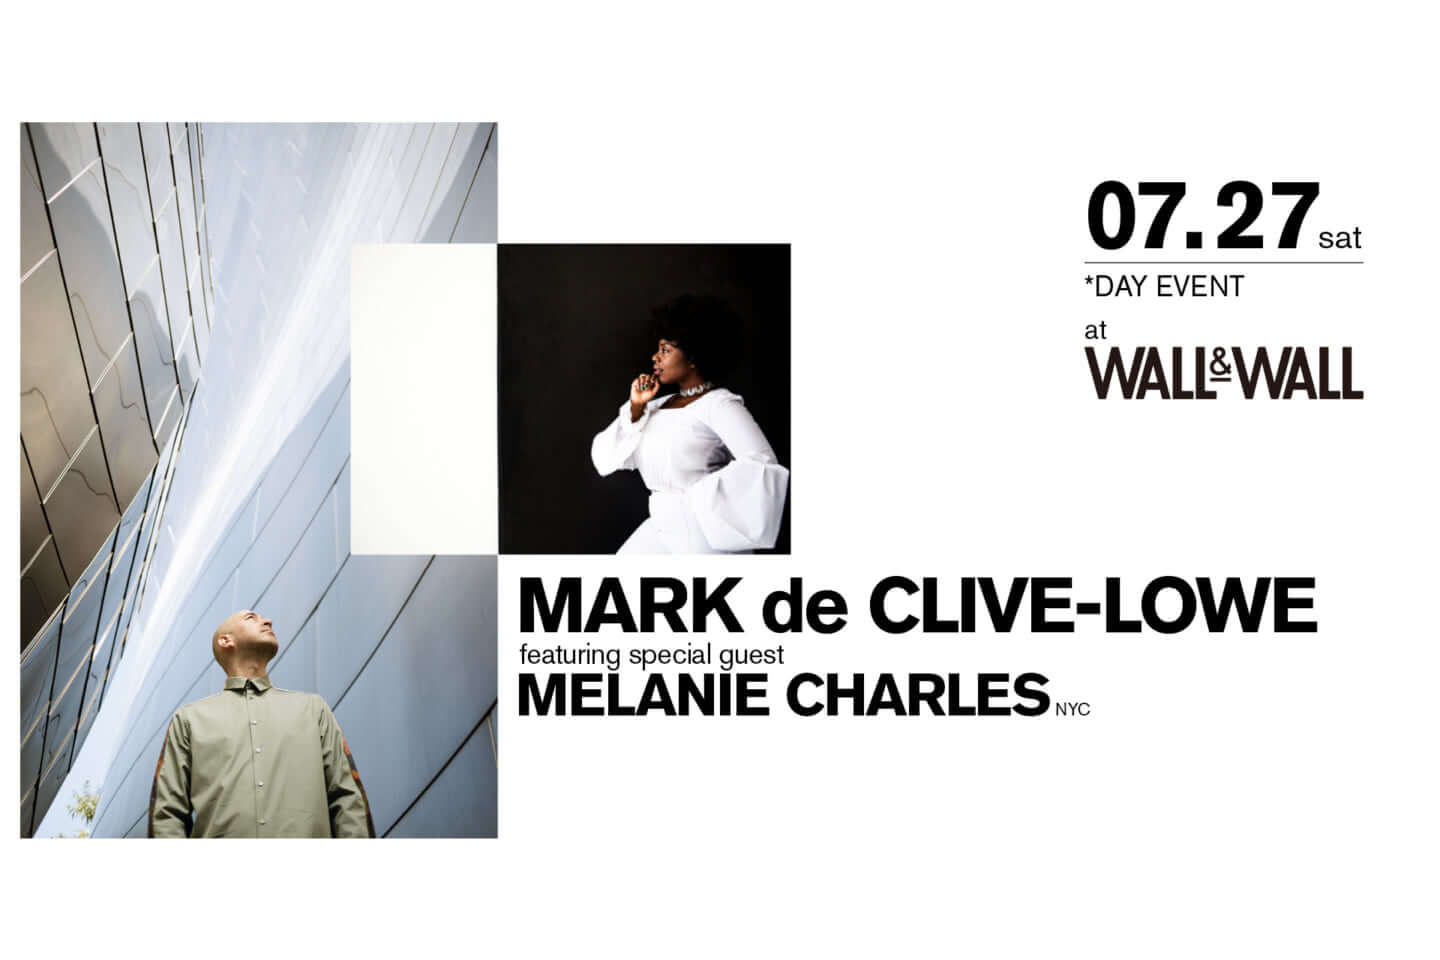 MARK de CLIVE-LOWE featuring special guest MELANIE CHARLES